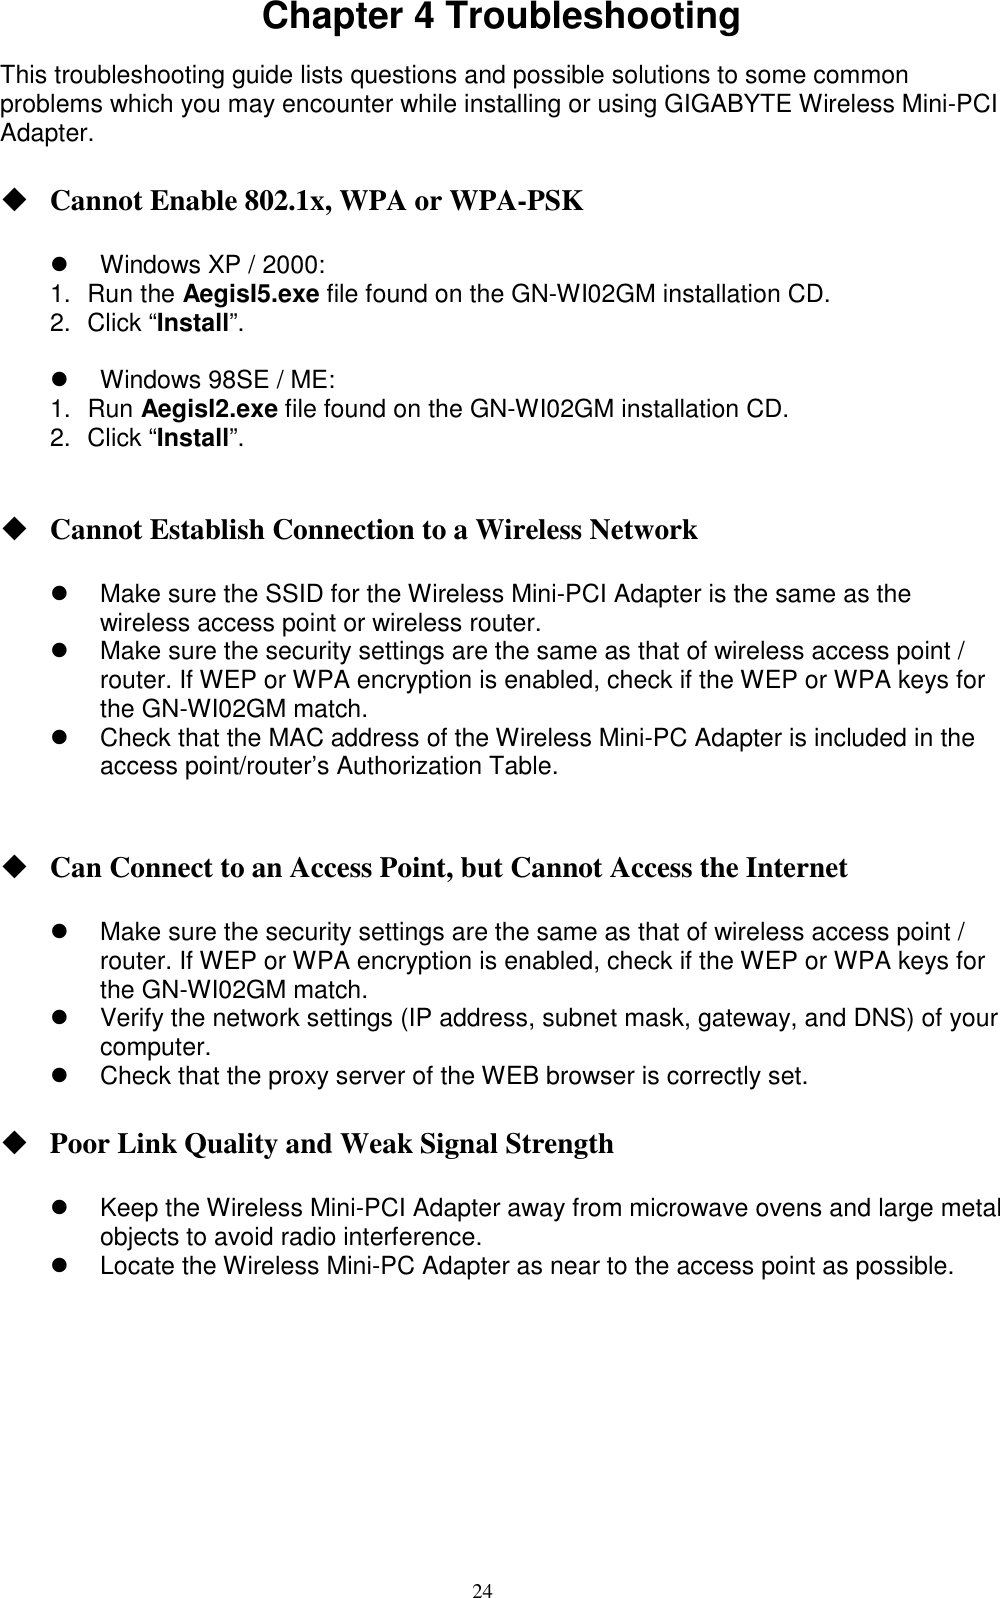 24  Chapter 4 Troubleshooting  This troubleshooting guide lists questions and possible solutions to some common problems which you may encounter while installing or using GIGABYTE Wireless Mini-PCI Adapter.   Cannot Enable 802.1x, WPA or WPA-PSK  z  Windows XP / 2000: 1. Run the AegisI5.exe file found on the GN-WI02GM installation CD. 2. Click “Install”.  z  Windows 98SE / ME: 1. Run AegisI2.exe file found on the GN-WI02GM installation CD. 2. Click “Install”.    Cannot Establish Connection to a Wireless Network  z  Make sure the SSID for the Wireless Mini-PCI Adapter is the same as the wireless access point or wireless router. z  Make sure the security settings are the same as that of wireless access point / router. If WEP or WPA encryption is enabled, check if the WEP or WPA keys for the GN-WI02GM match.   z  Check that the MAC address of the Wireless Mini-PC Adapter is included in the access point/router’s Authorization Table.      Can Connect to an Access Point, but Cannot Access the Internet  z  Make sure the security settings are the same as that of wireless access point / router. If WEP or WPA encryption is enabled, check if the WEP or WPA keys for the GN-WI02GM match.   z  Verify the network settings (IP address, subnet mask, gateway, and DNS) of your computer. z  Check that the proxy server of the WEB browser is correctly set.   Poor Link Quality and Weak Signal Strength  z  Keep the Wireless Mini-PCI Adapter away from microwave ovens and large metal objects to avoid radio interference. z  Locate the Wireless Mini-PC Adapter as near to the access point as possible.   